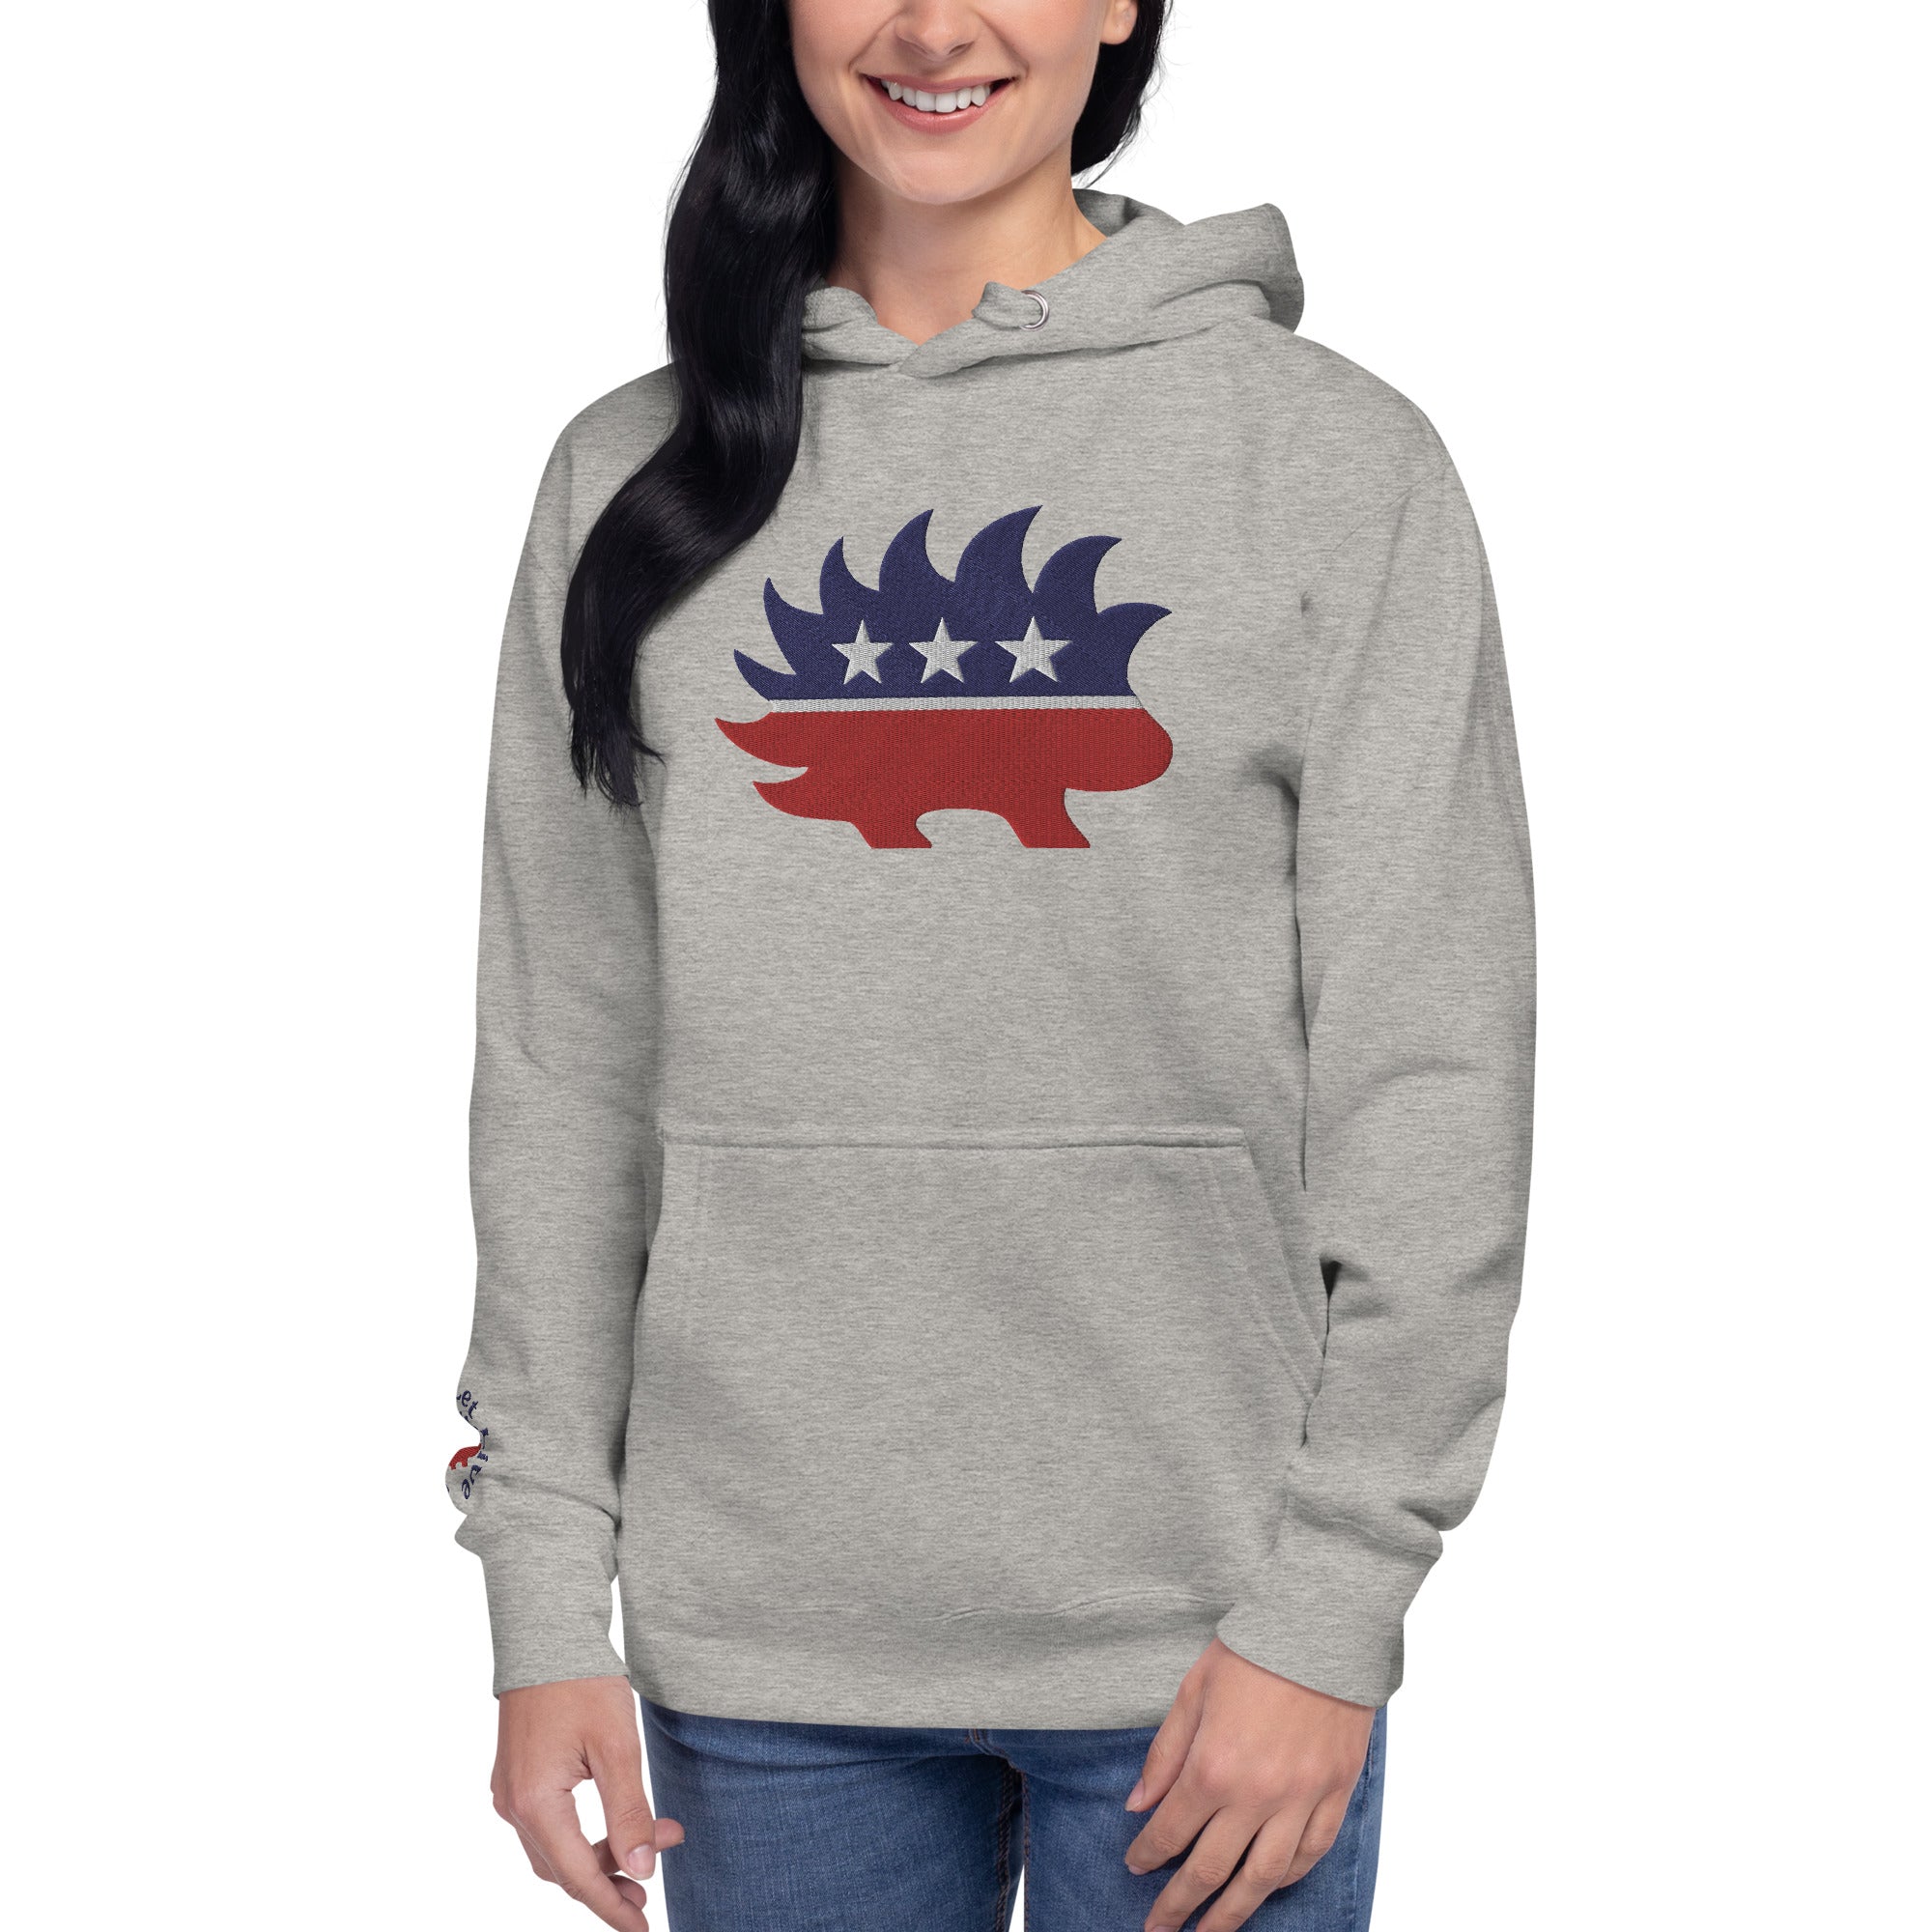 Porcupine Mascot Live & Let Live Embroidered Hoodie Sweatshirts